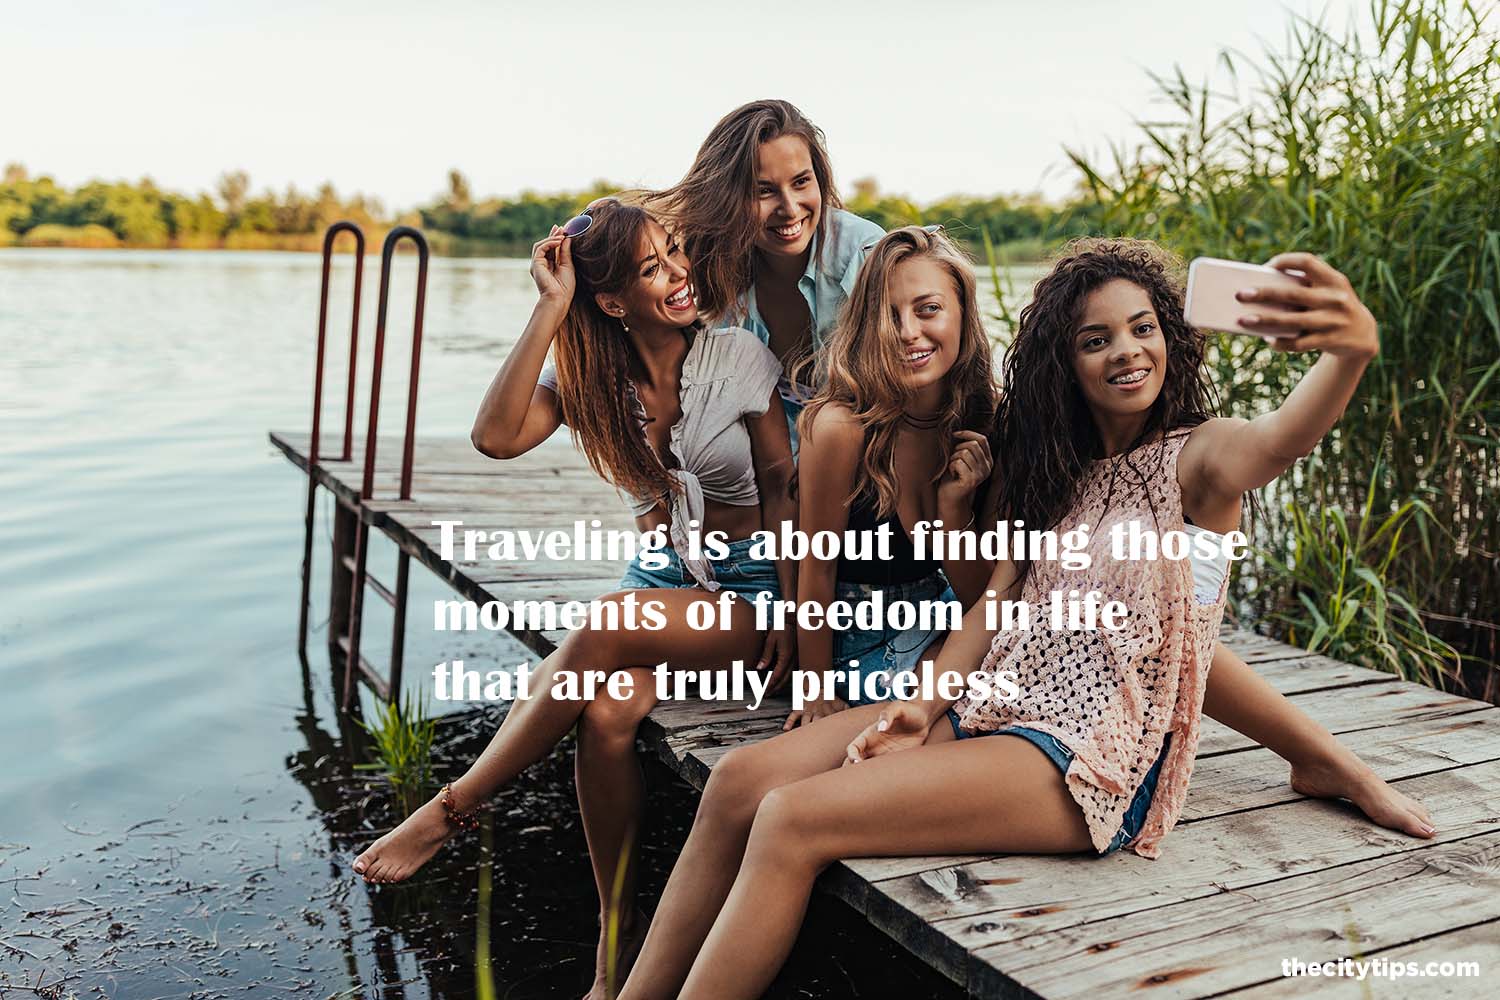 "Traveling is about finding those moments of freedom in life that are truly priceless."